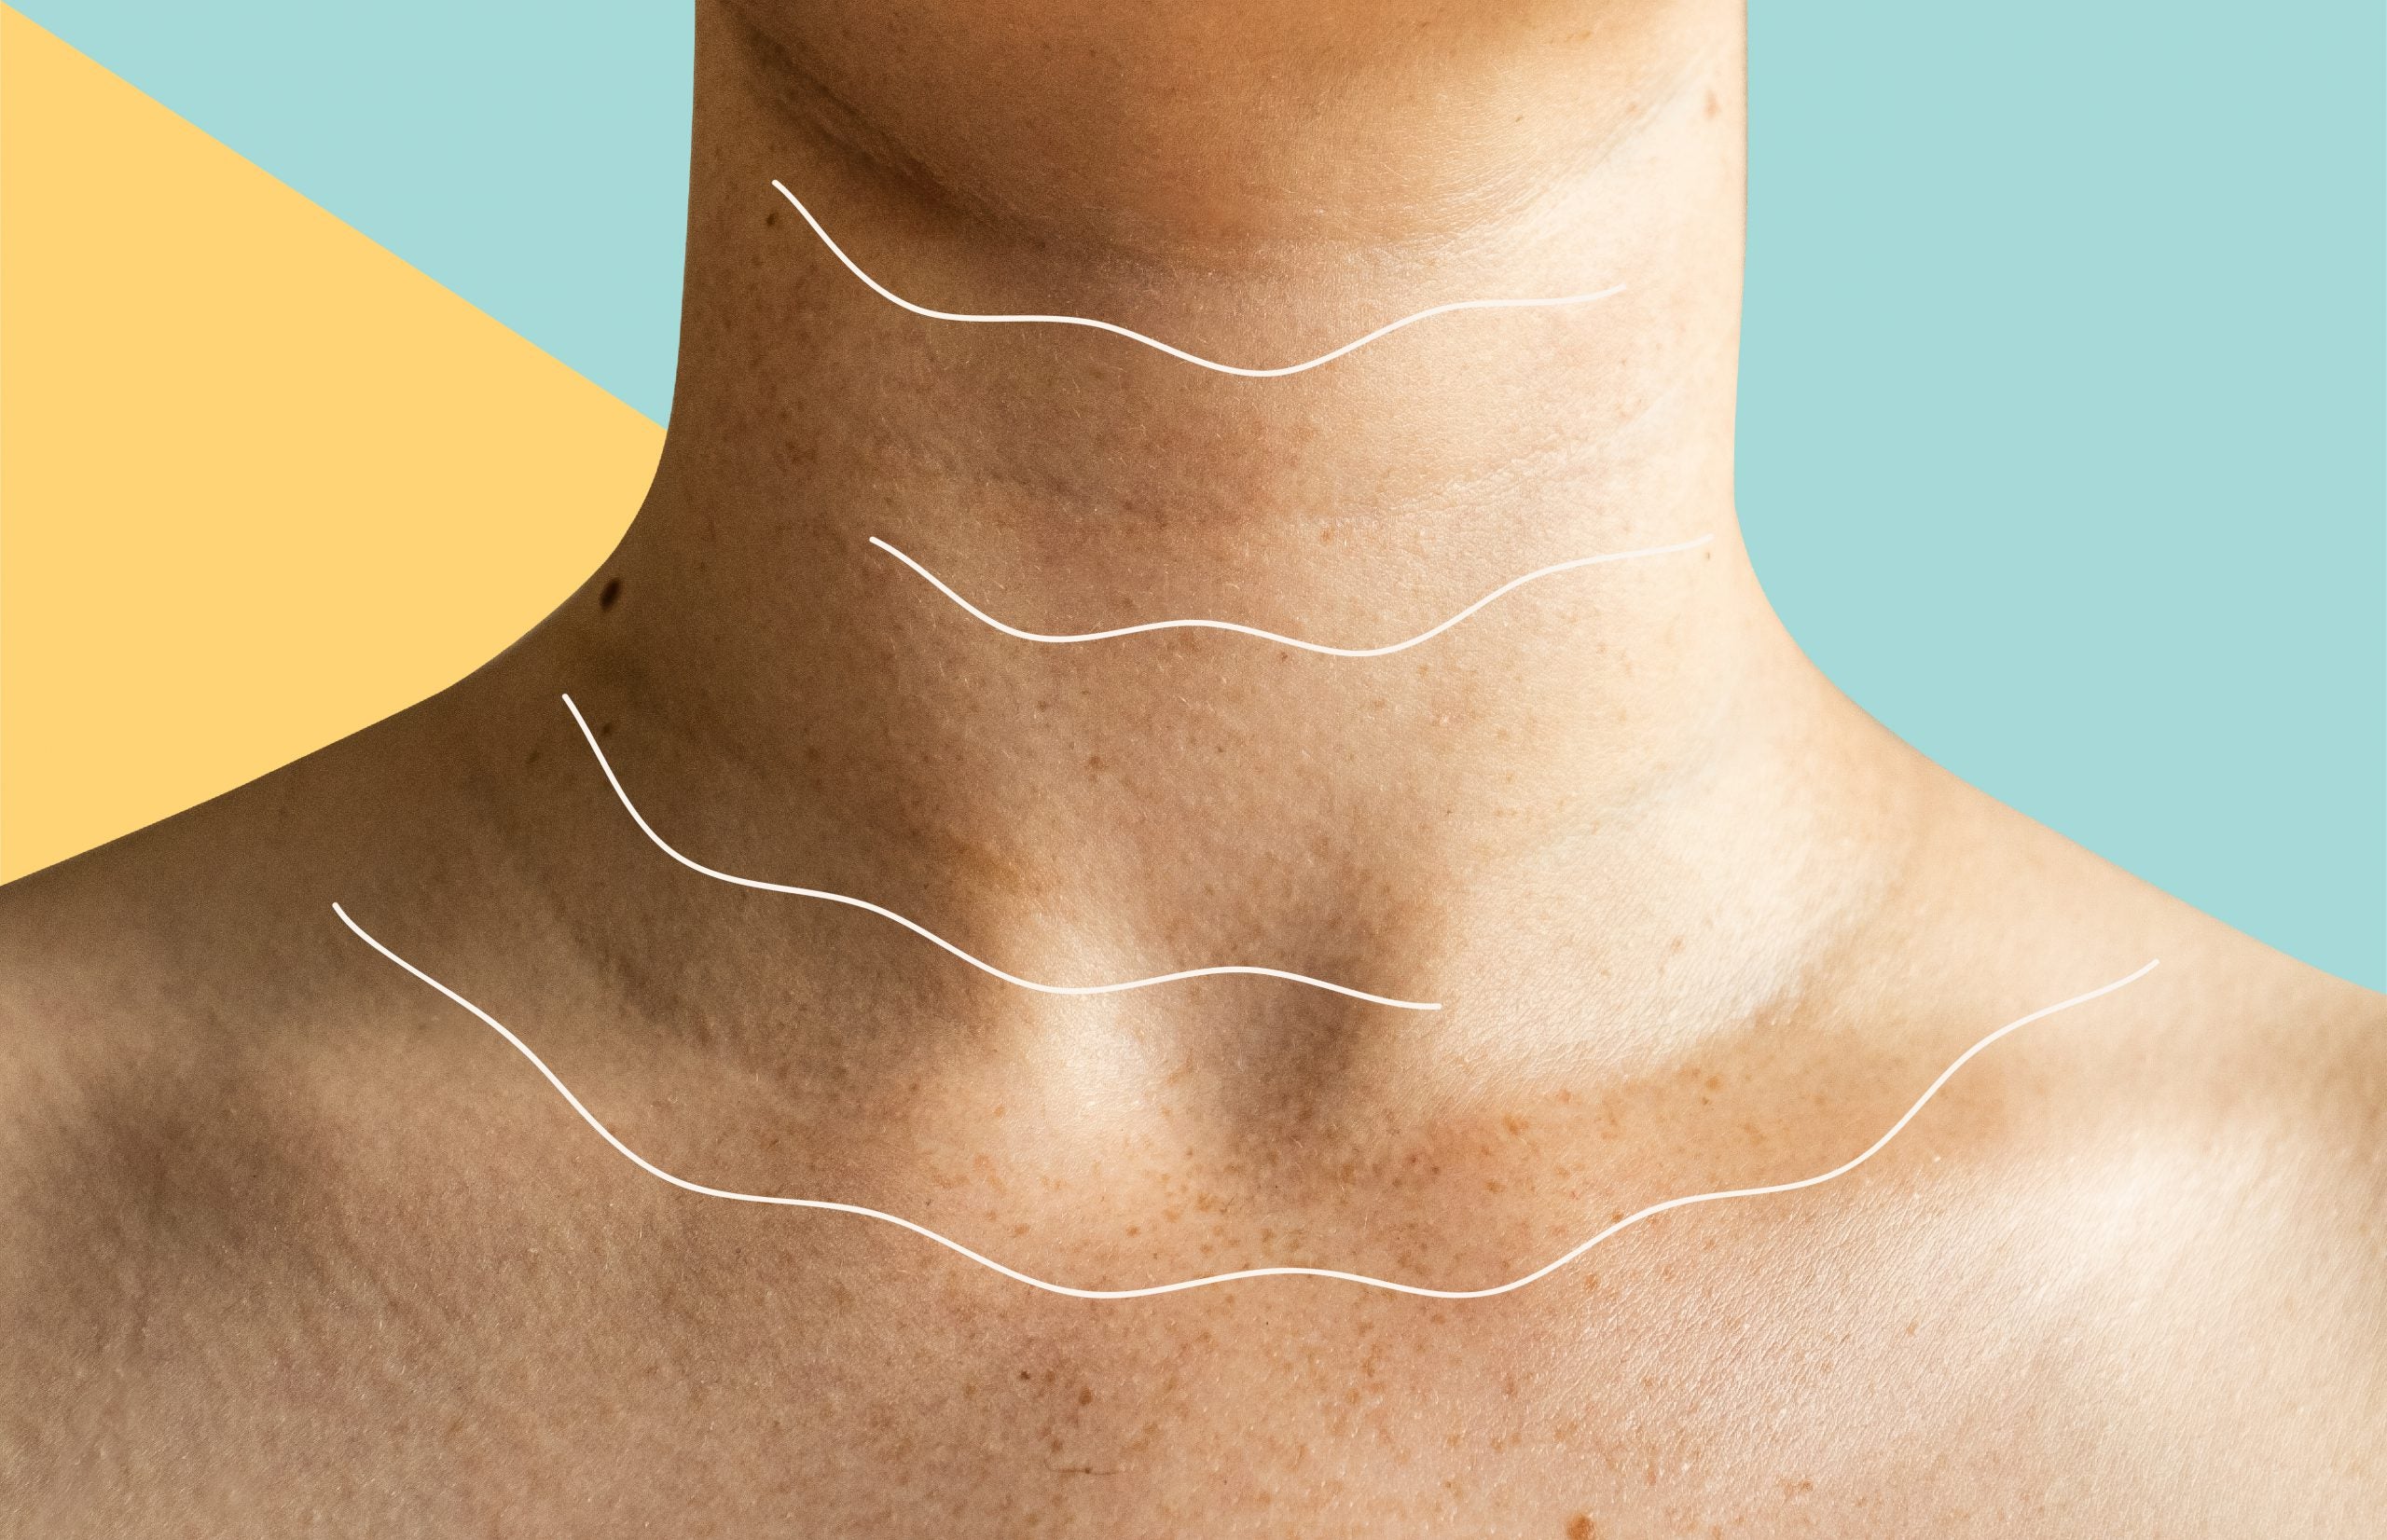 How to Fix Neck Wrinkles and Sagging